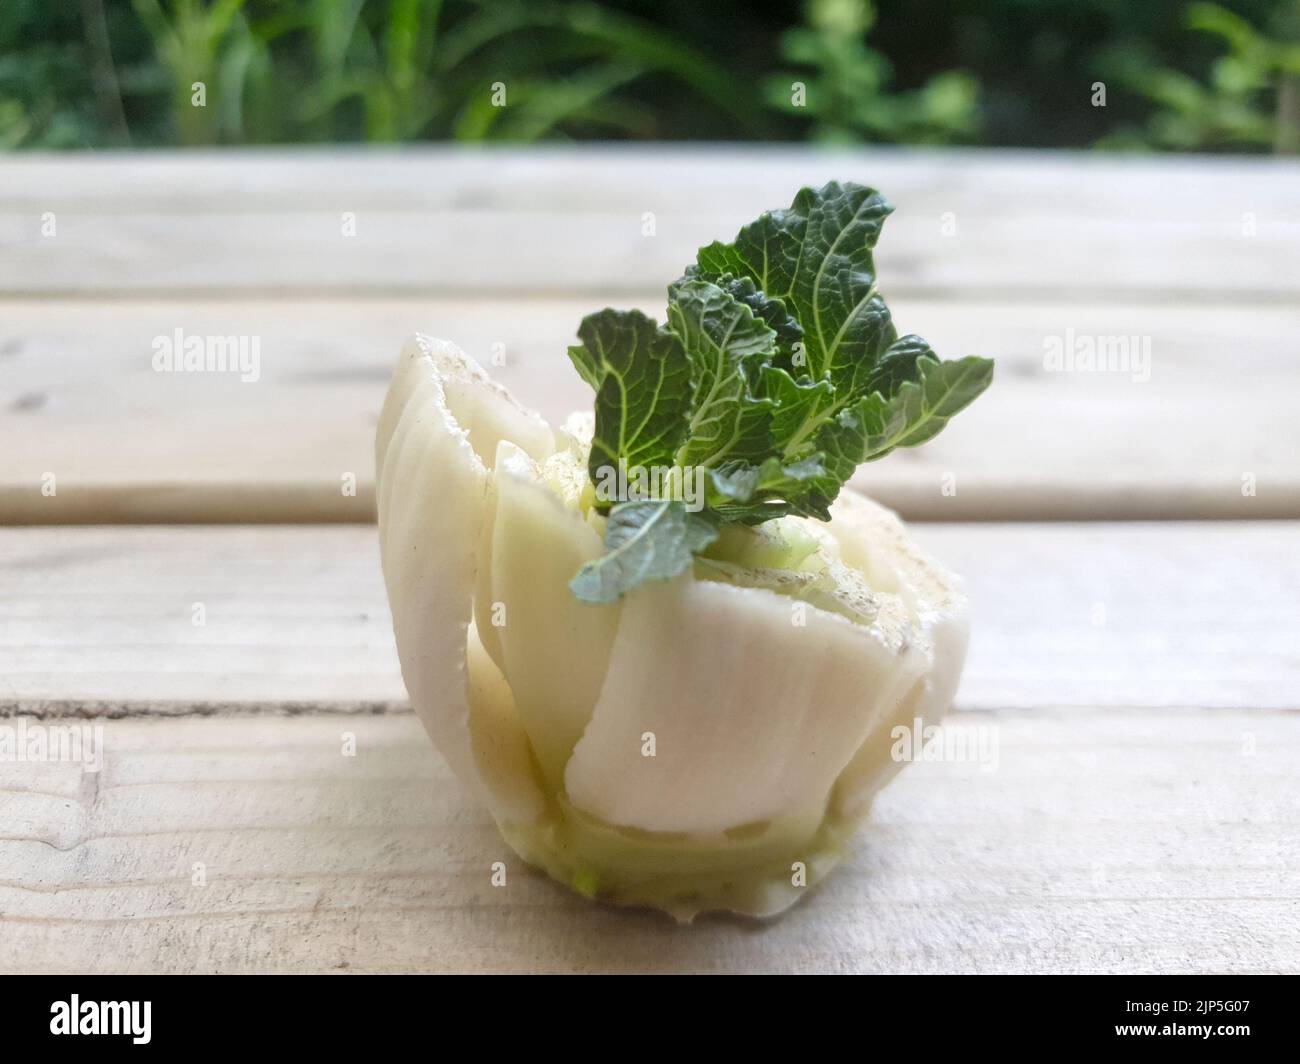 Growing bok choy or pak choi, Chinese cabbage, green leaf vegetable. Stock Photo